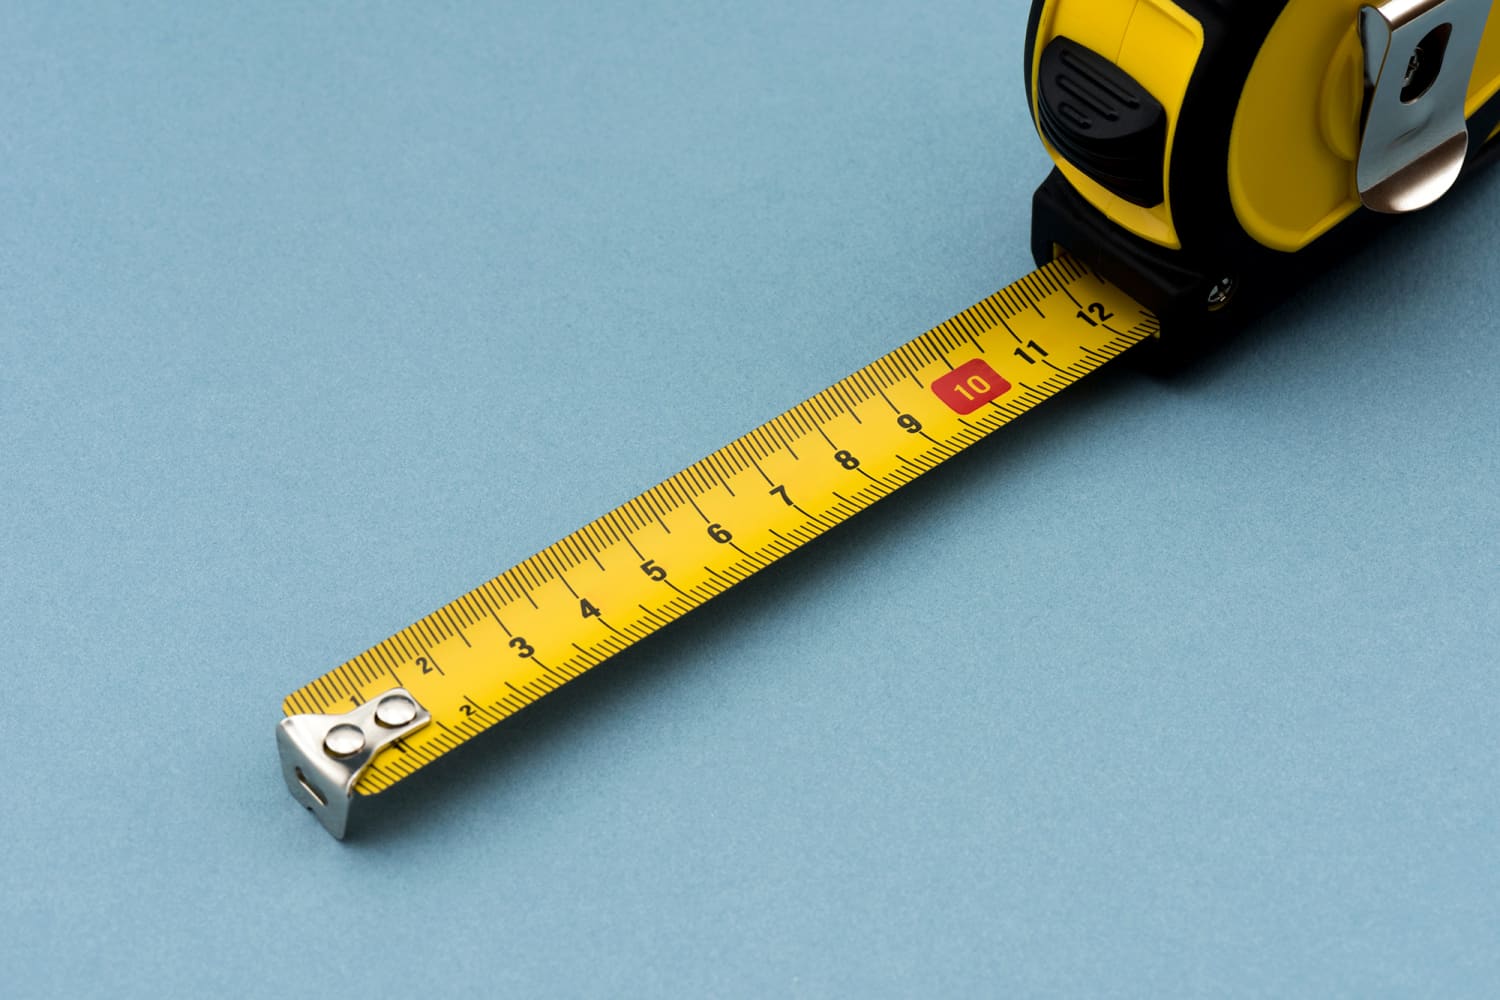 Body Metrics On Point With The Top 5 Tape Measures!